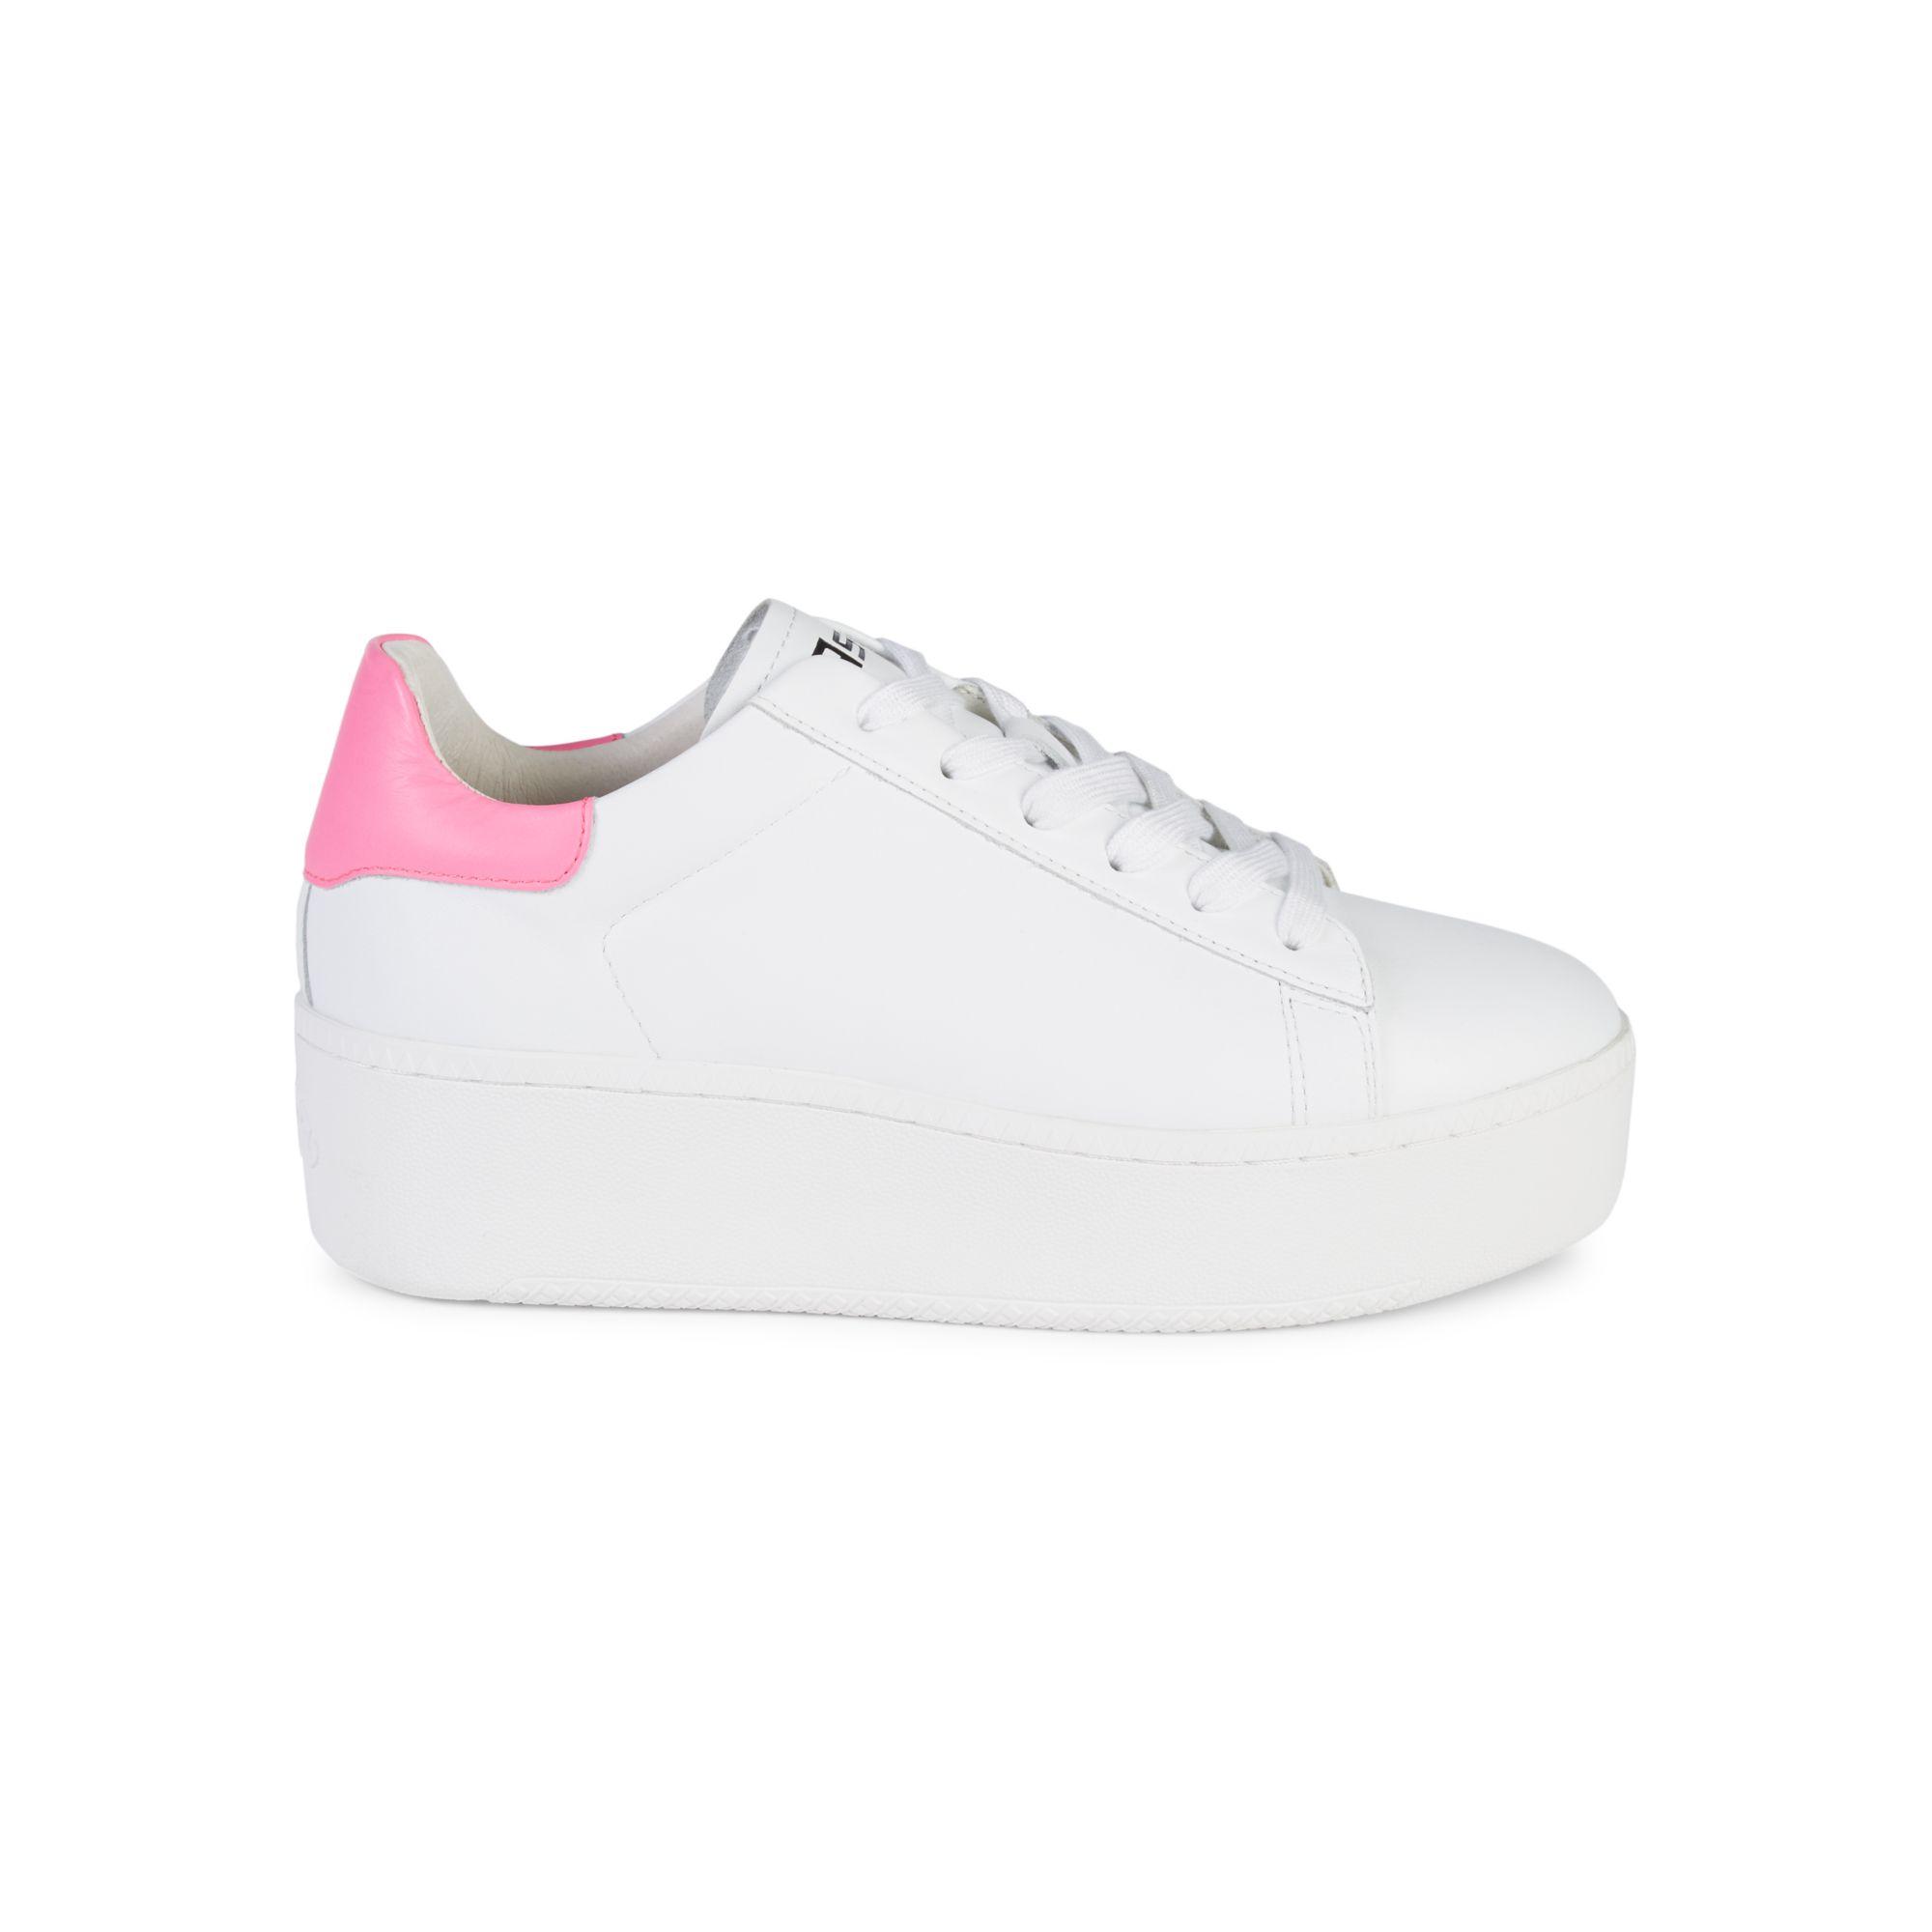 Ash Cult Leather Platform Sneakers in White Pink (White) - Lyst